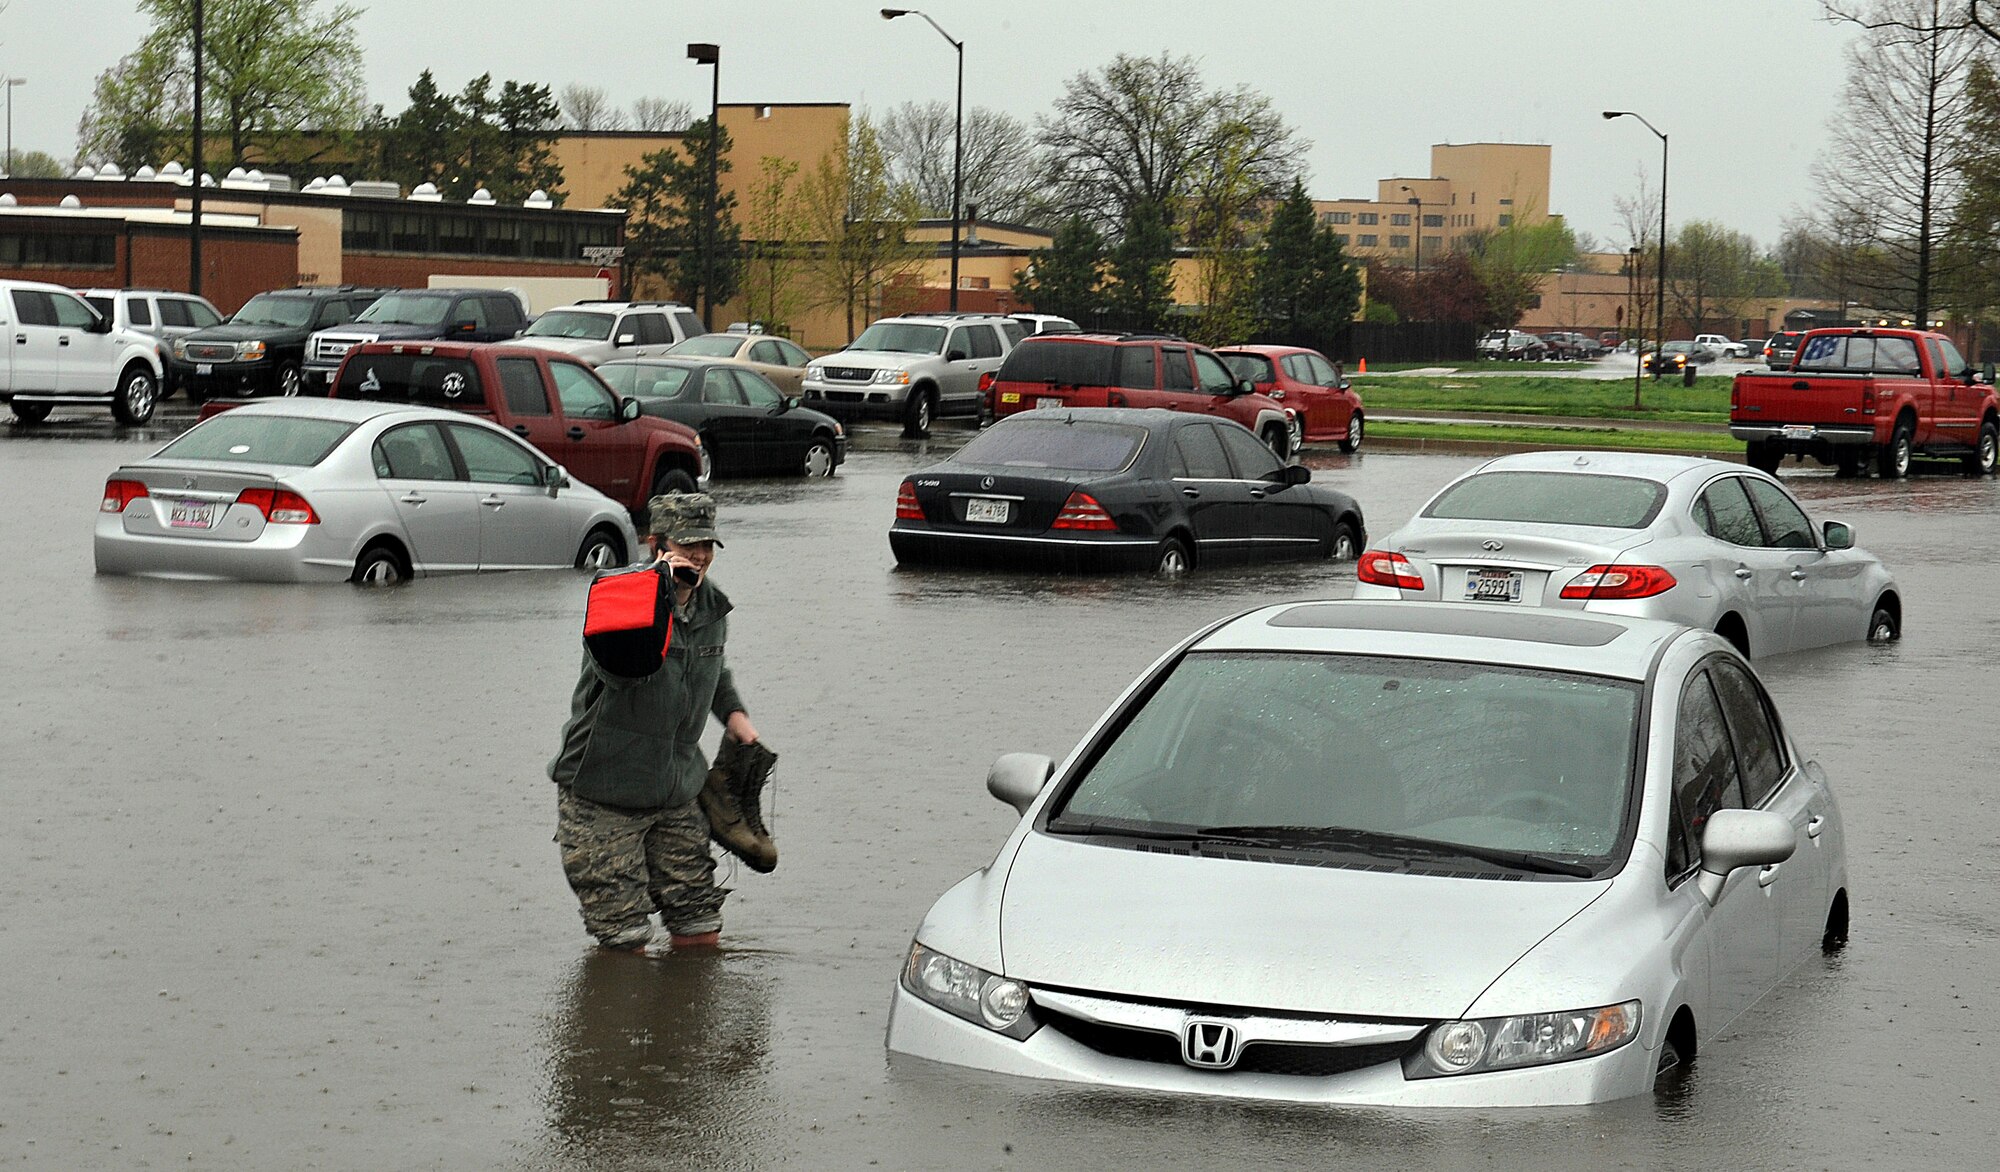 Workers from Bldg. 1900 found their cars swamped in the parking lot after heavy downpours at Scott Air Force Base, Ill., April. 18, 2013.  In total, 5.2 inches of rain deluged the low-lying areas of the base, forcing several roads to close and early release of some workers. Several Soldiers helped coworkers move their cars from the flooded areas.  (U.S. Air Force photo/Airman 1st Class Jaeda Waffer)